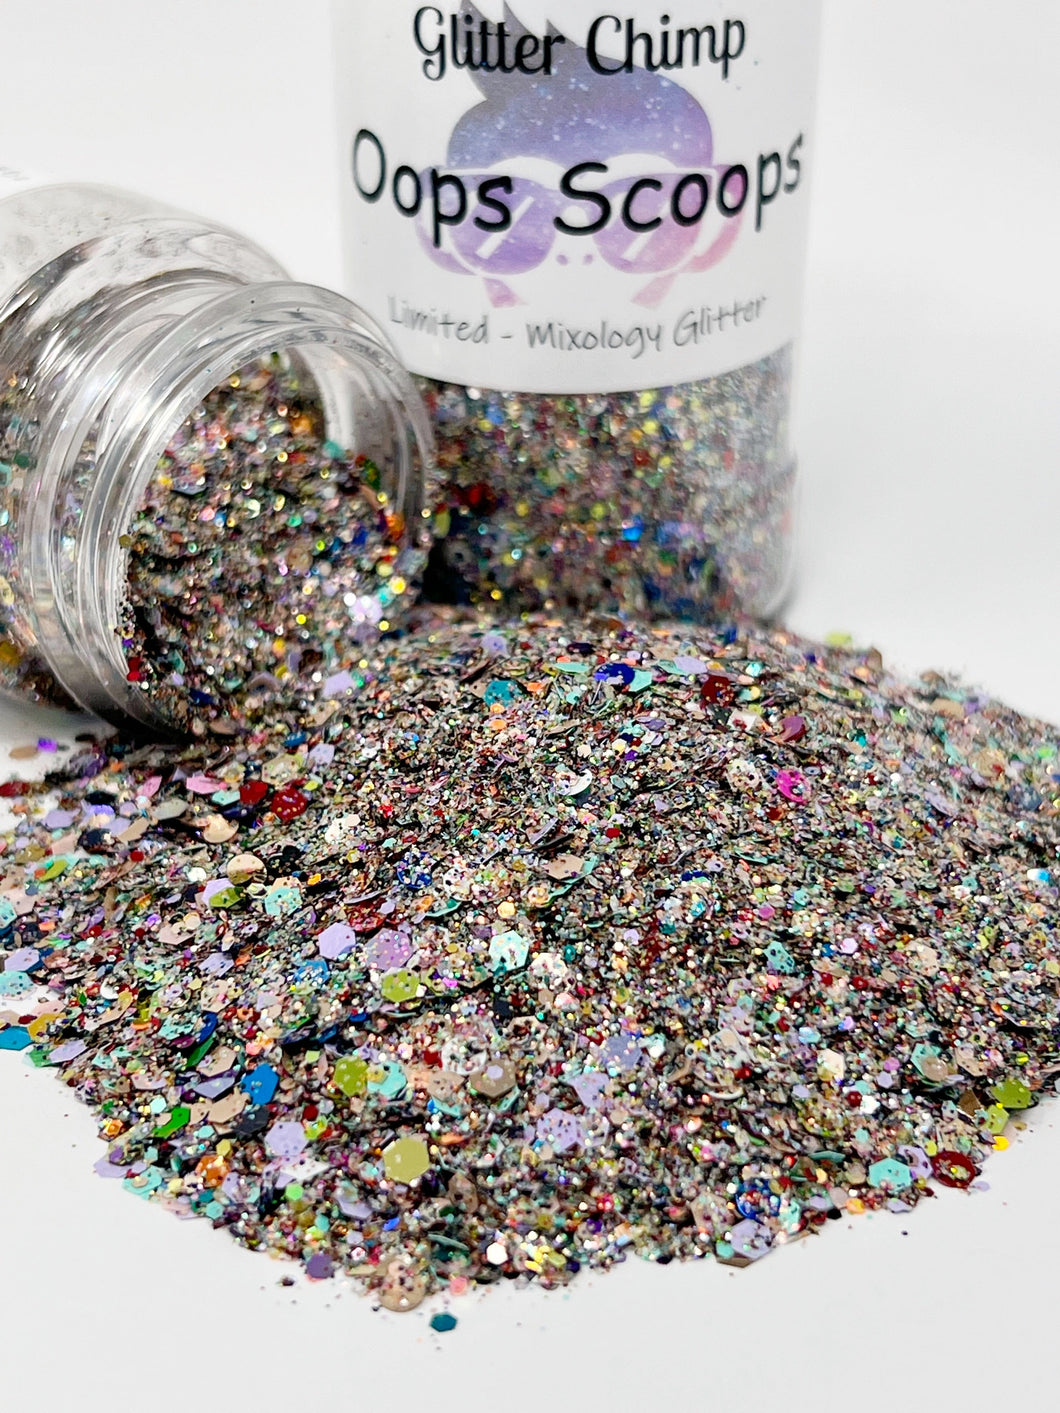 Oops Scoops - Limited Mixology Glitter - Batch 5